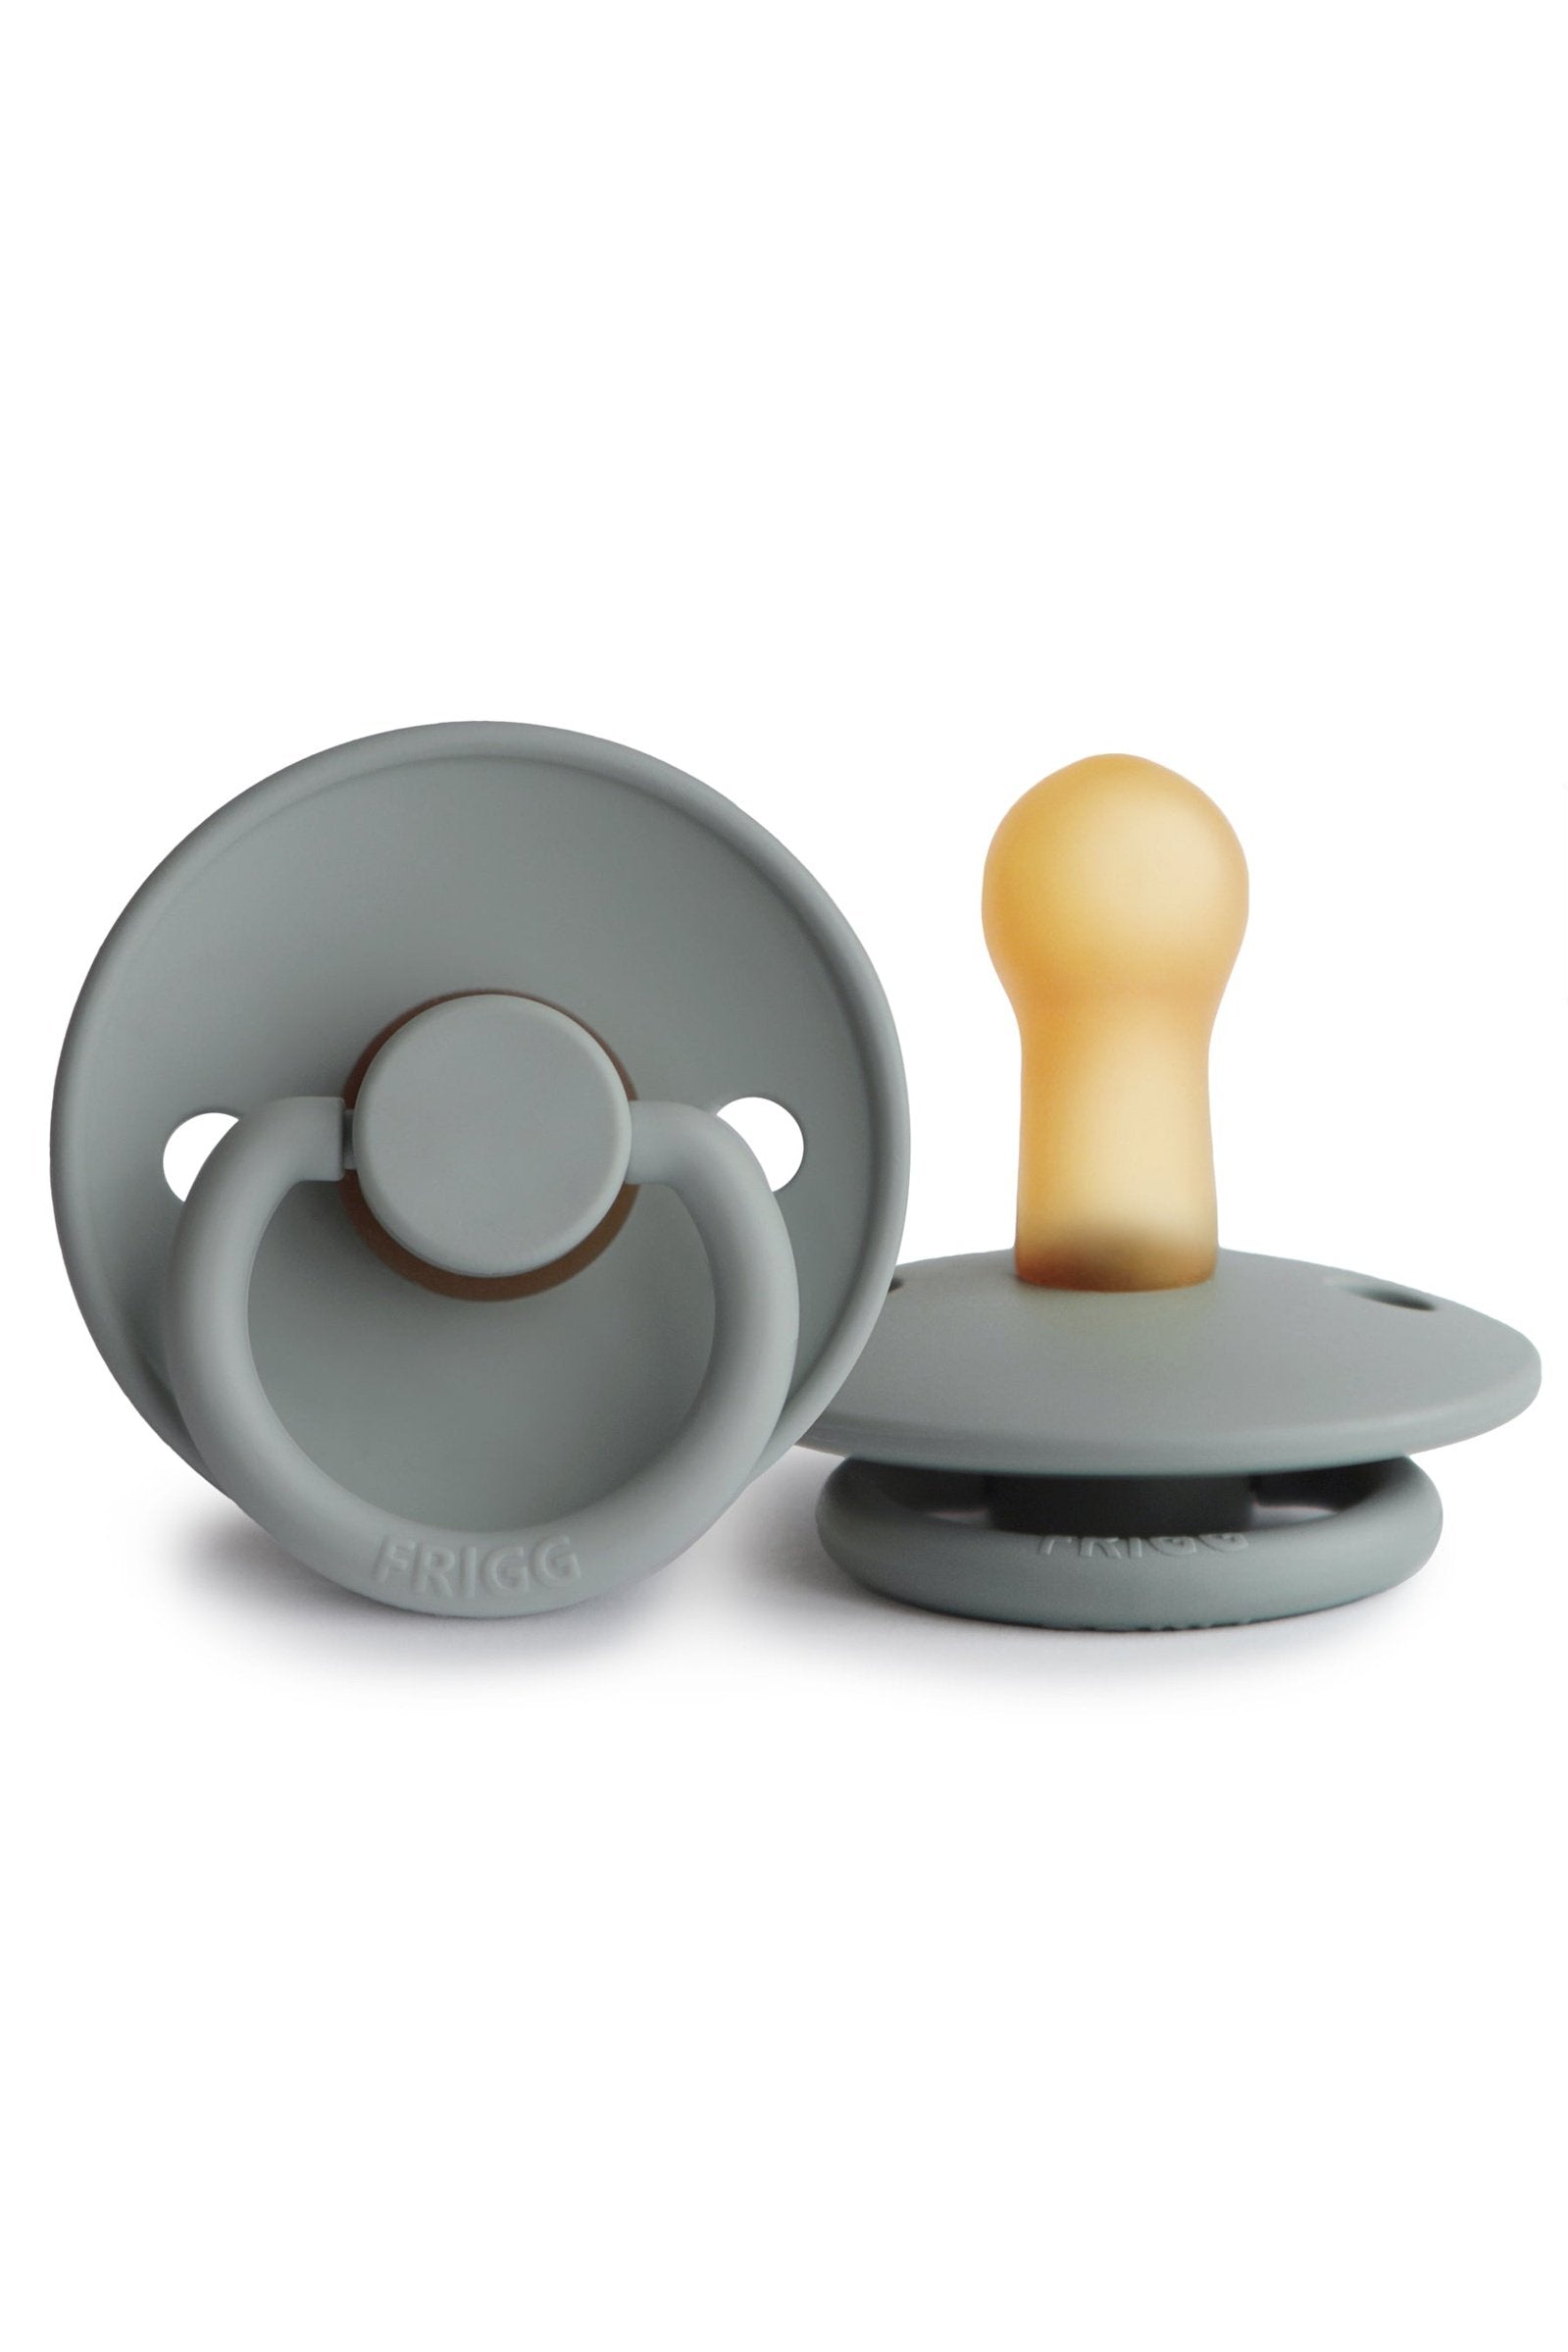 FRIGG Classic Pacifier-French Gray